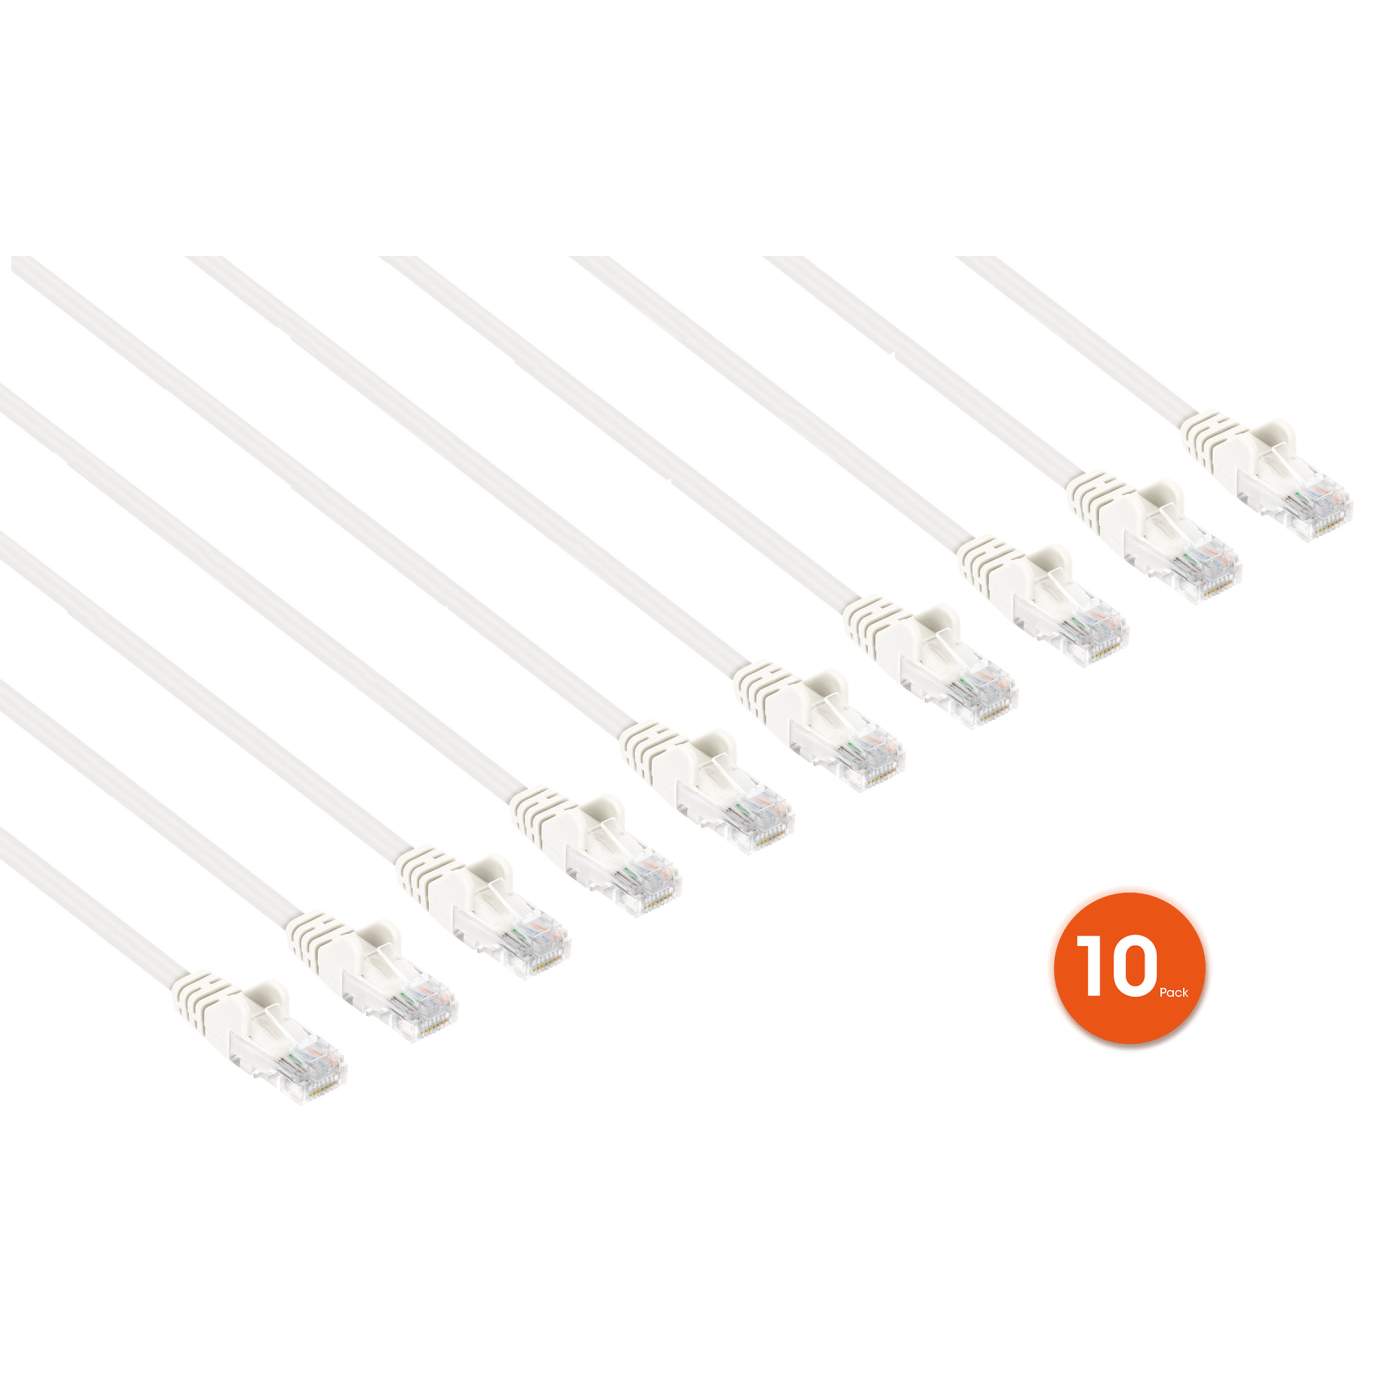 Cat6 U/UTP Slim Network Patch Cable, 7 ft., White, 10-Pack Image 2